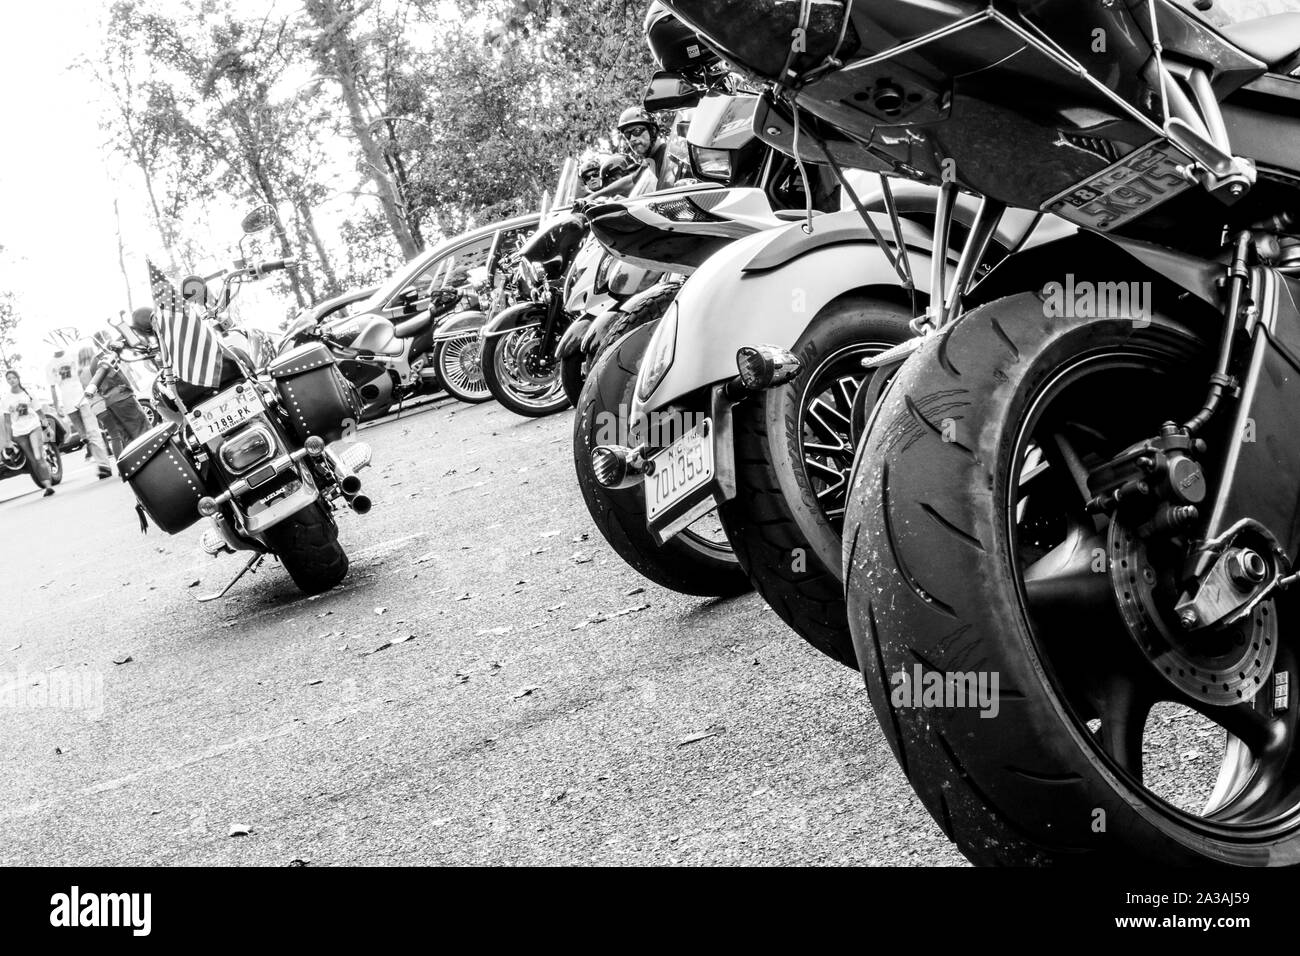 Motorcycles Gathered In Parking Lot at Morrow Mountain State Park Stock Photo